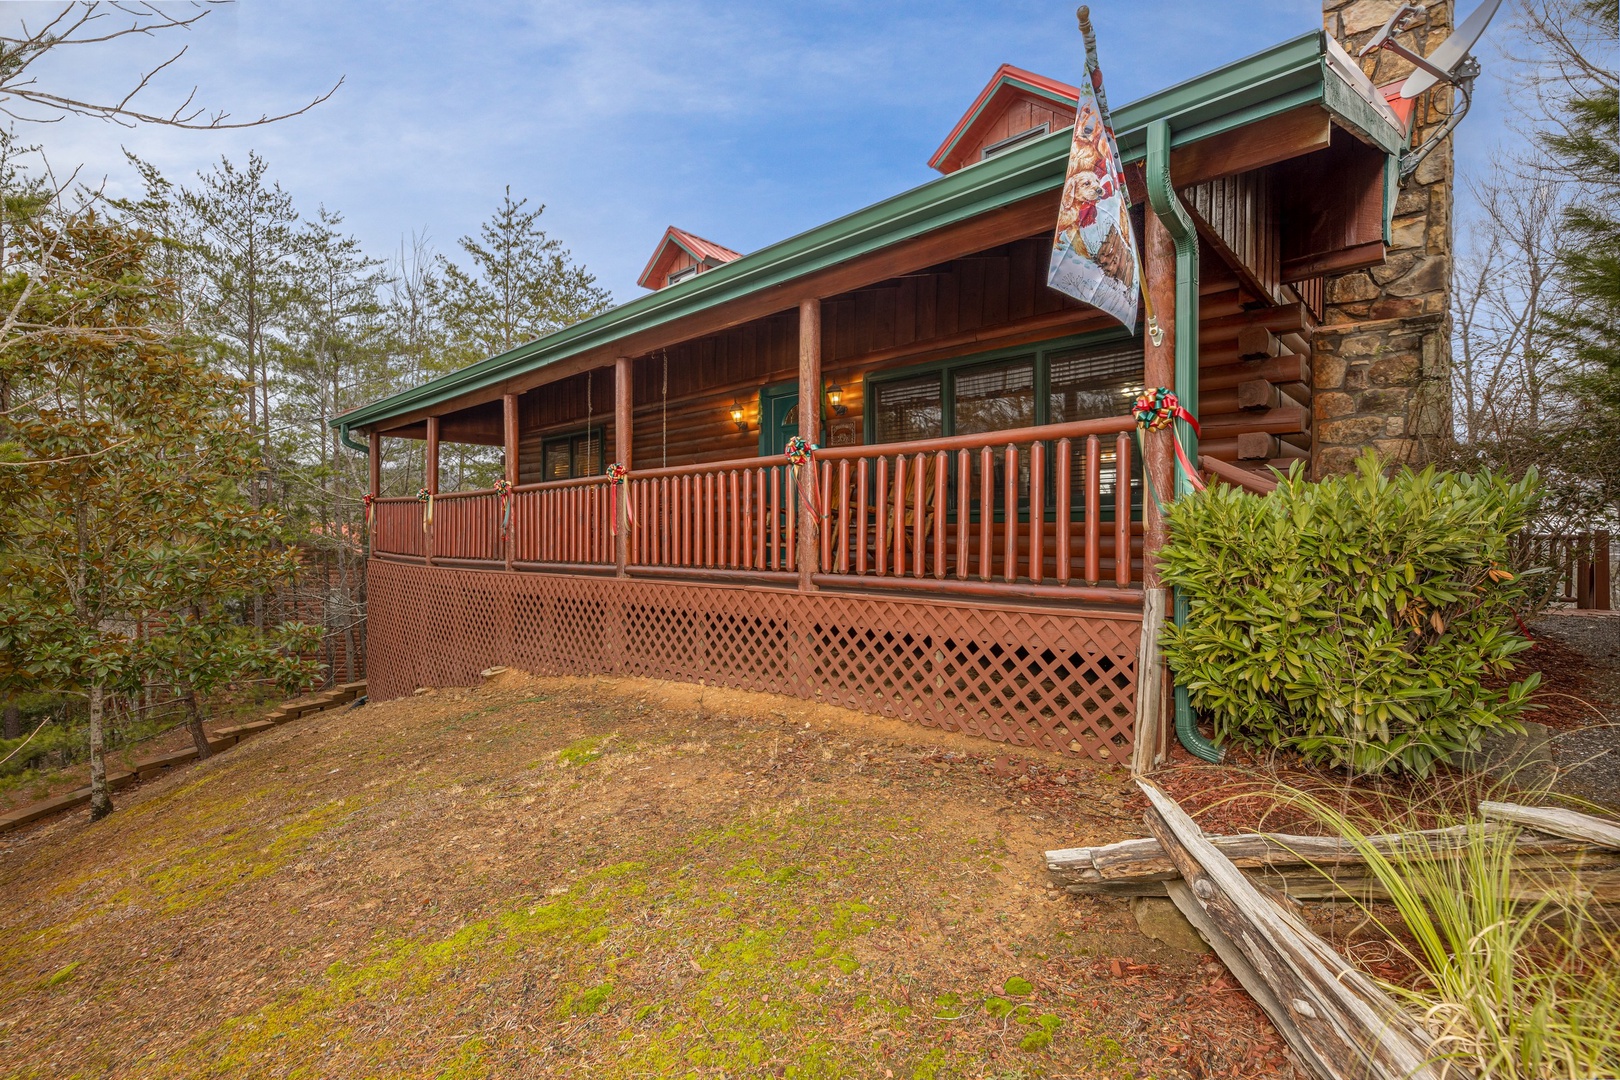 Yard and cabin at Pigeon Forge Pleasures, a 3 bedroom cabin rental located in Pigeon Forge